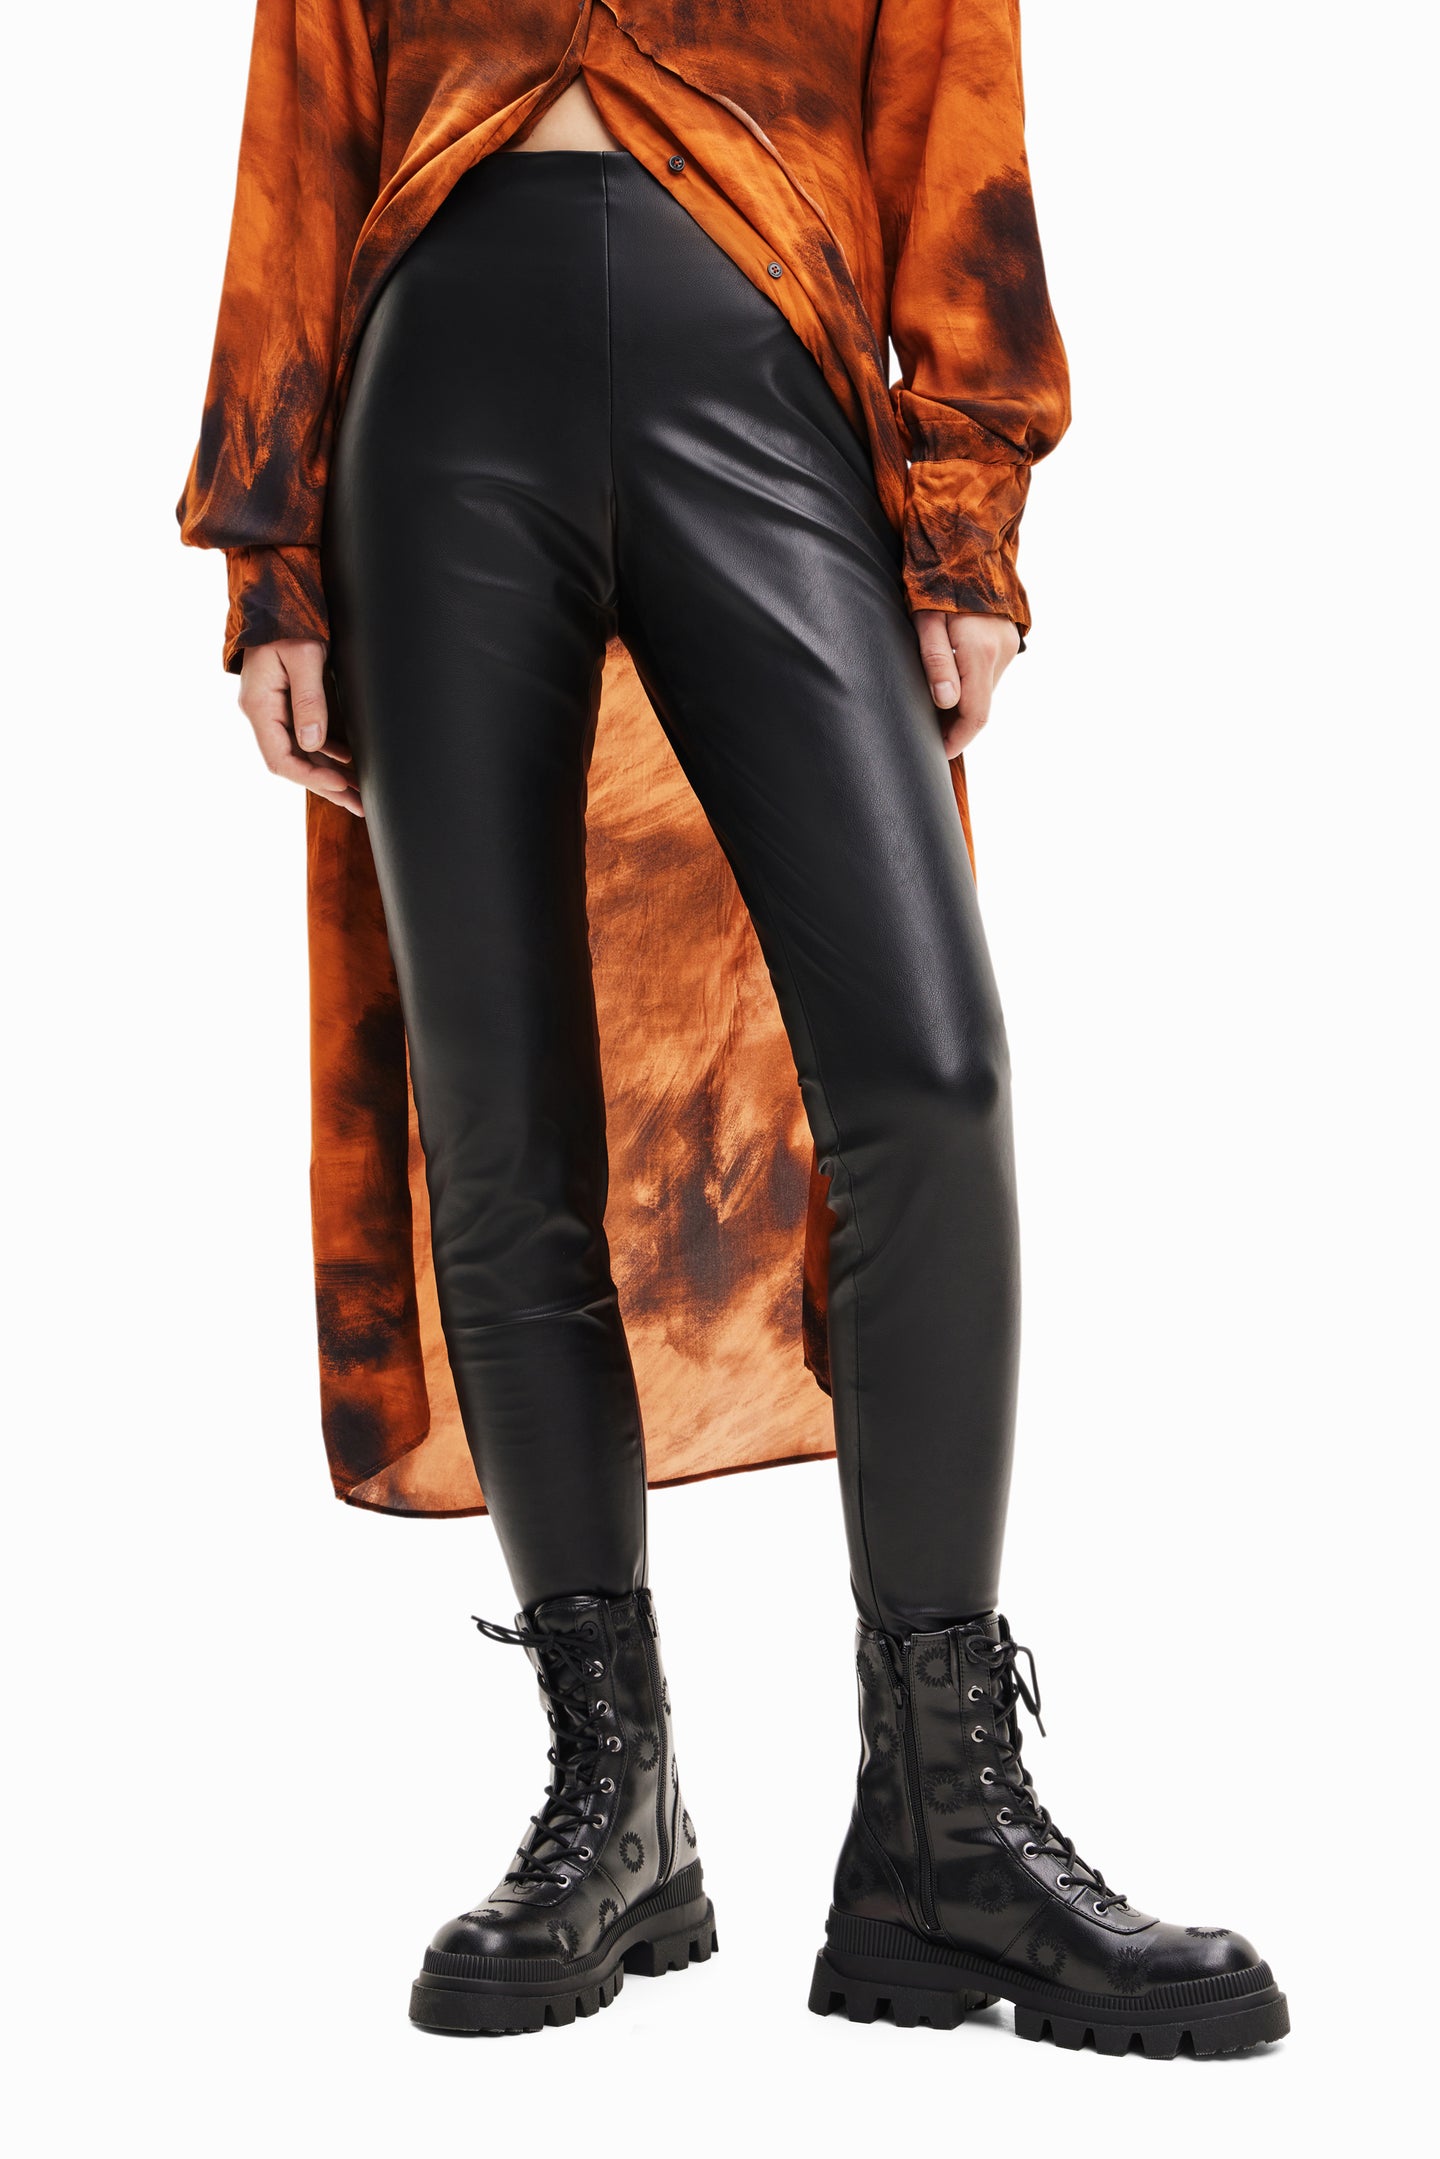 Desigual Leather-Effect Leggings - Above The Crowd Boutique